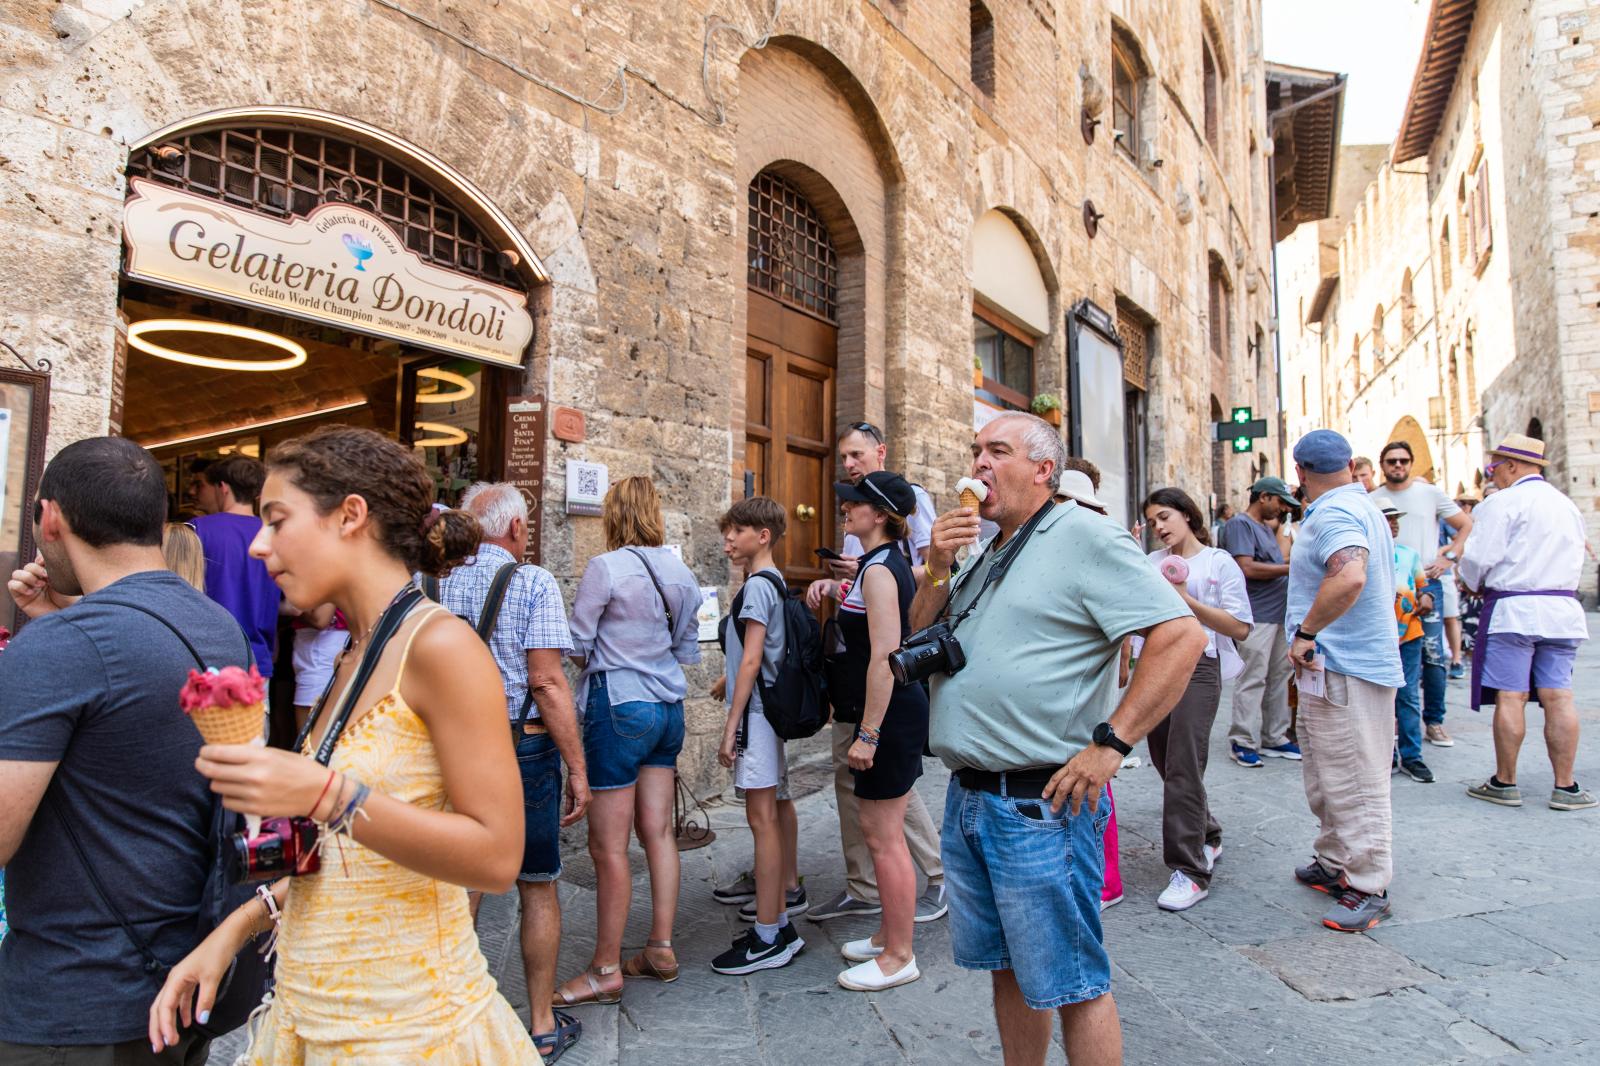 Long Lines at the World Champion Gelateria Gondola in San Gimignano, Italy | Buy this image